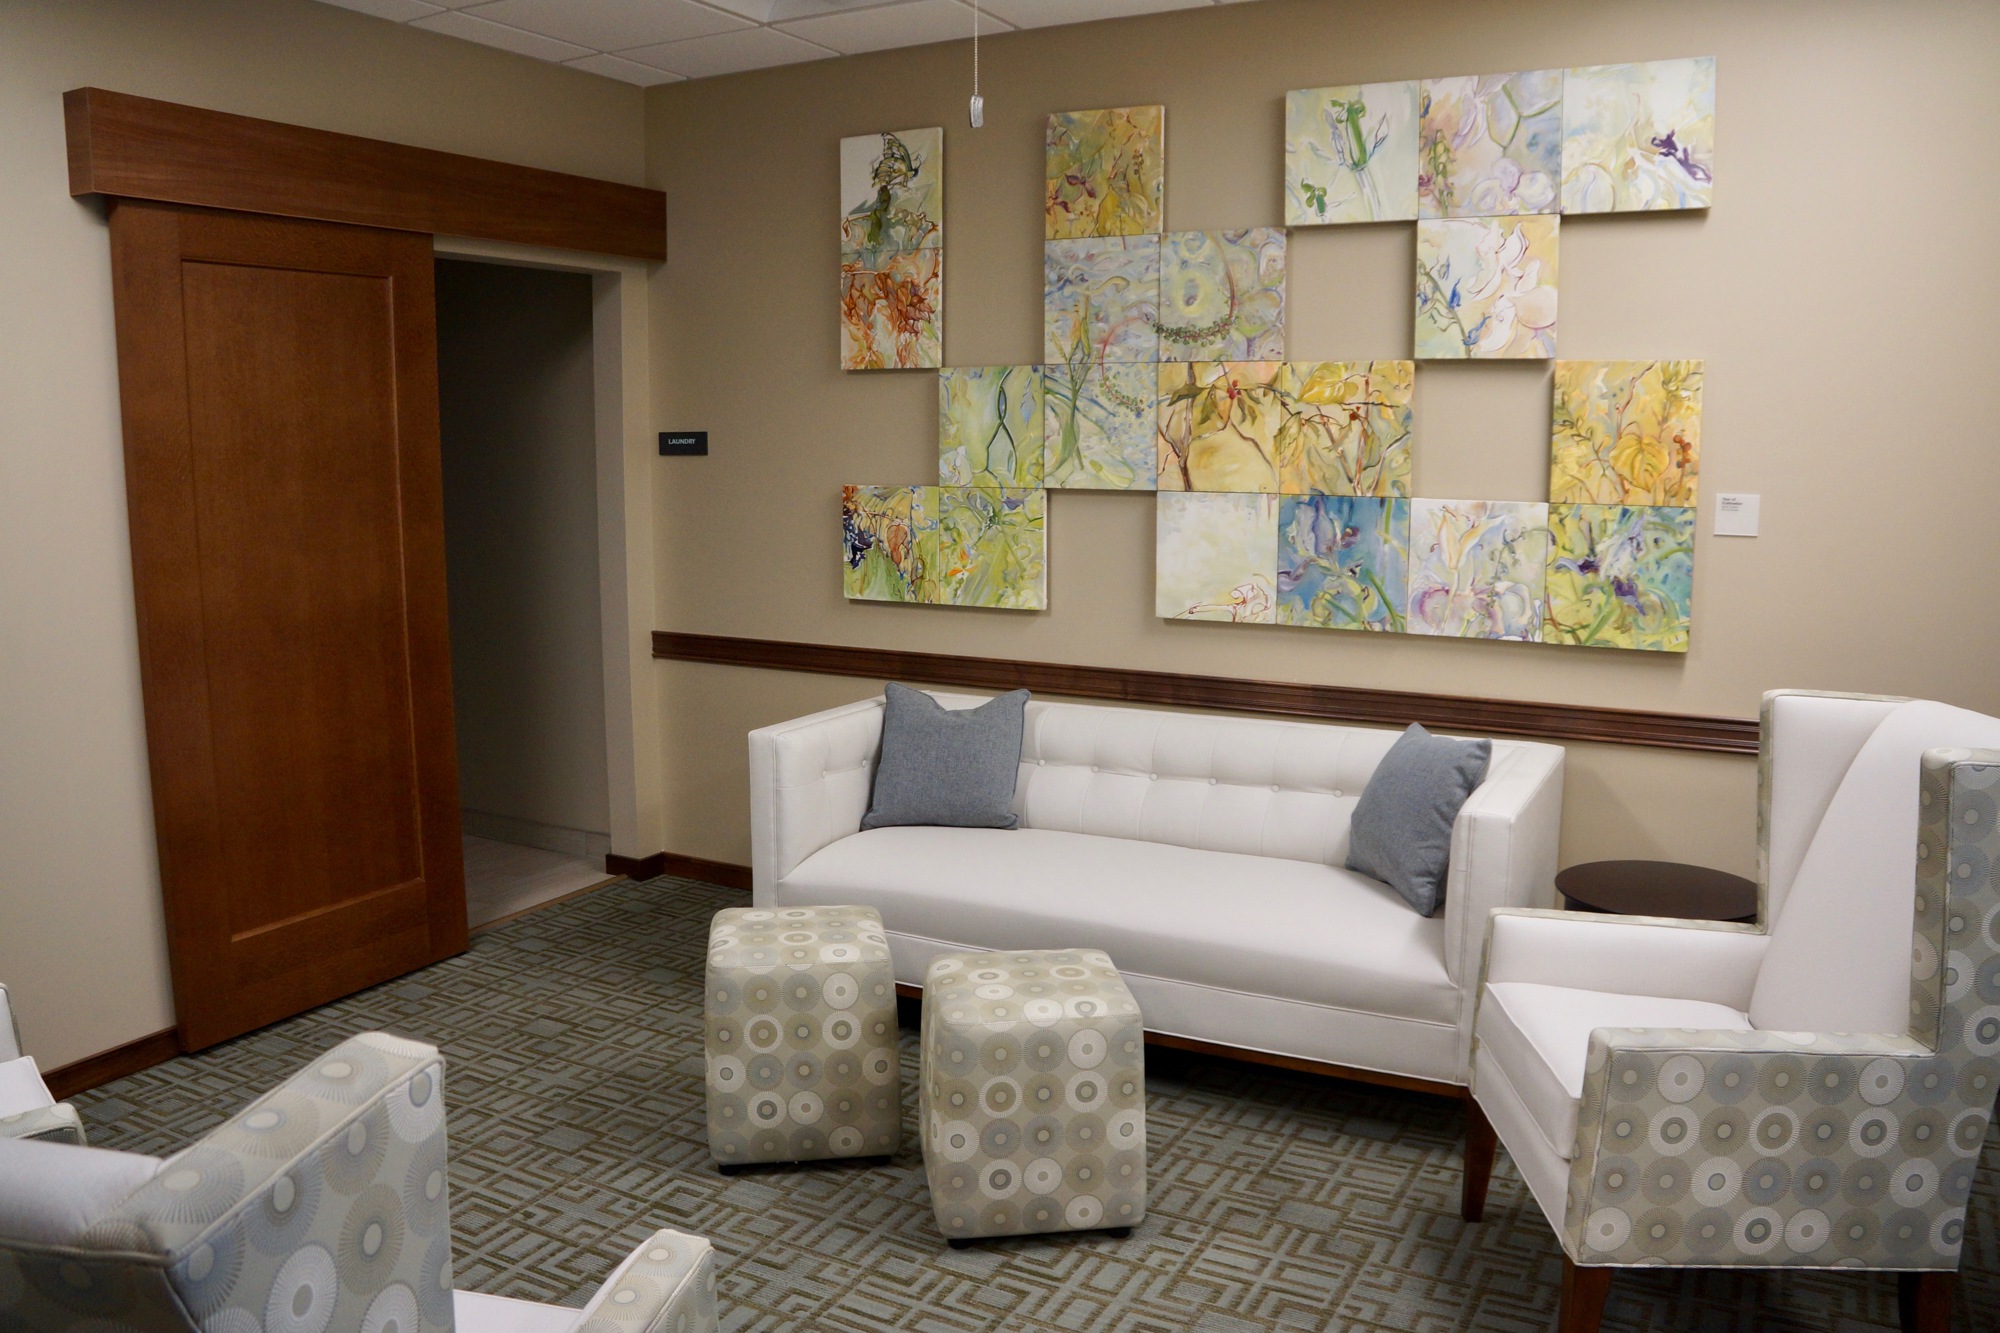 Local art is in the hallways and commissioned for each room.